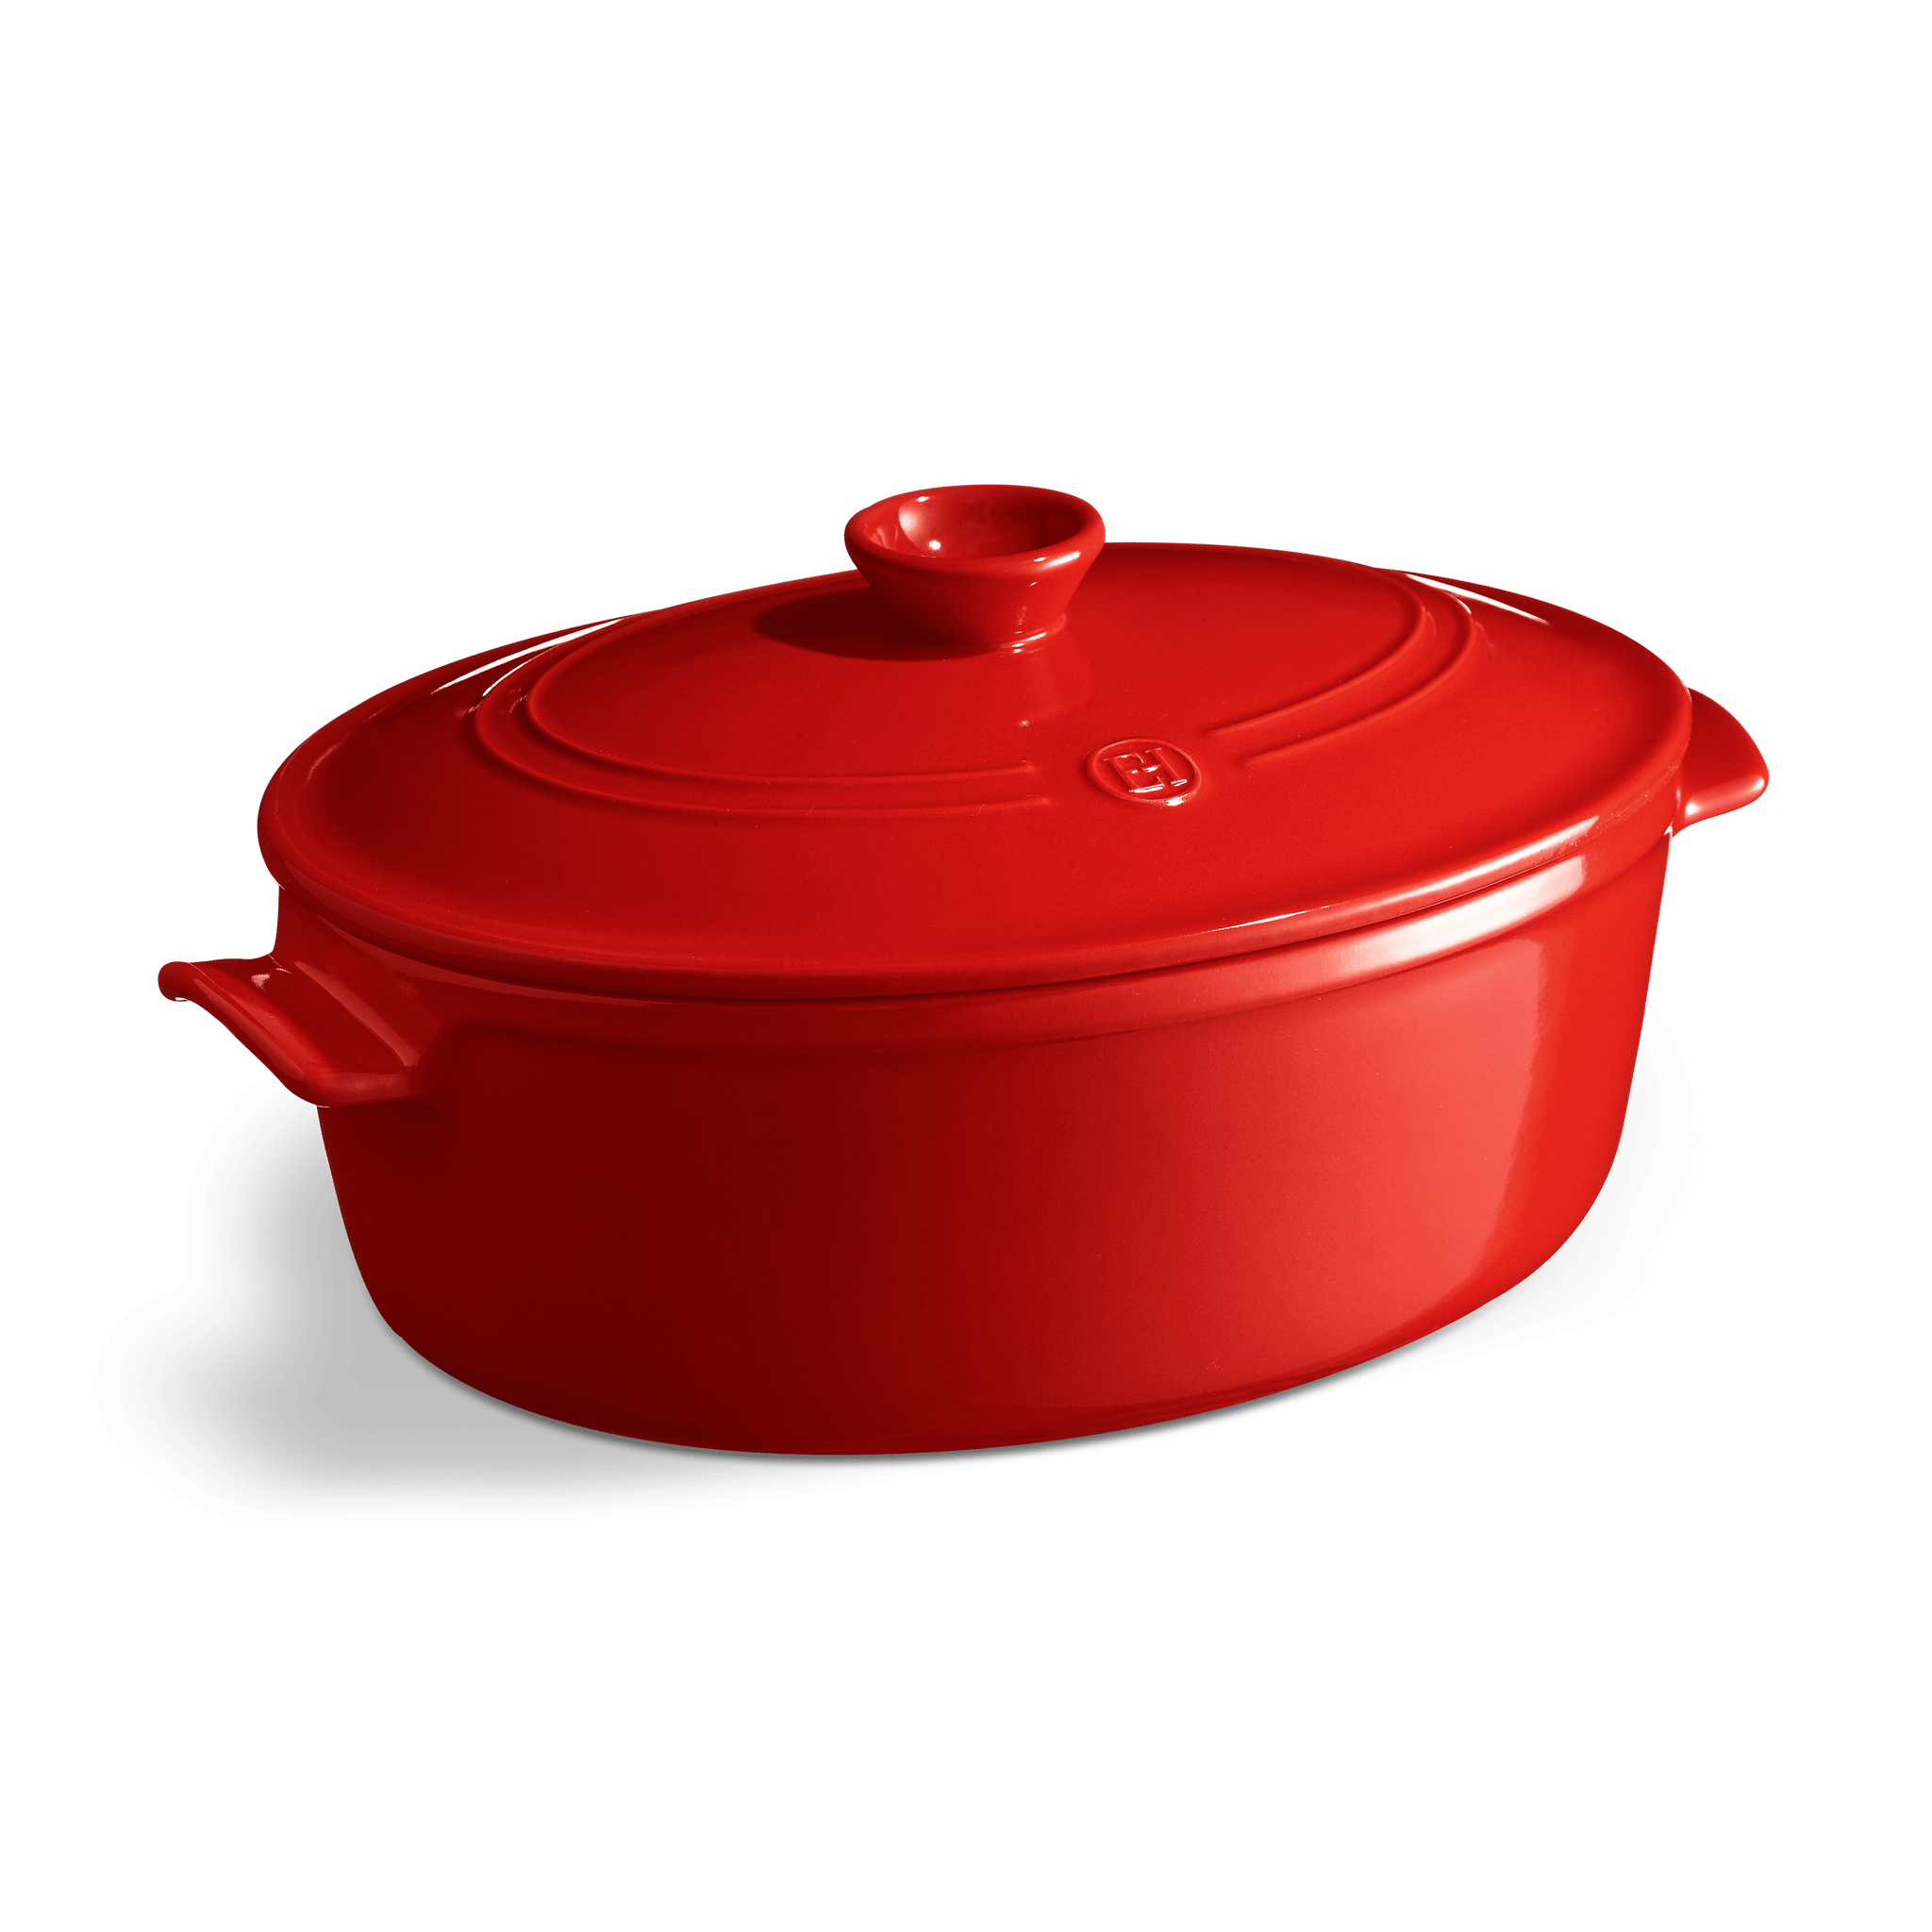 6 Quart Dutch Oven Made In The Usa